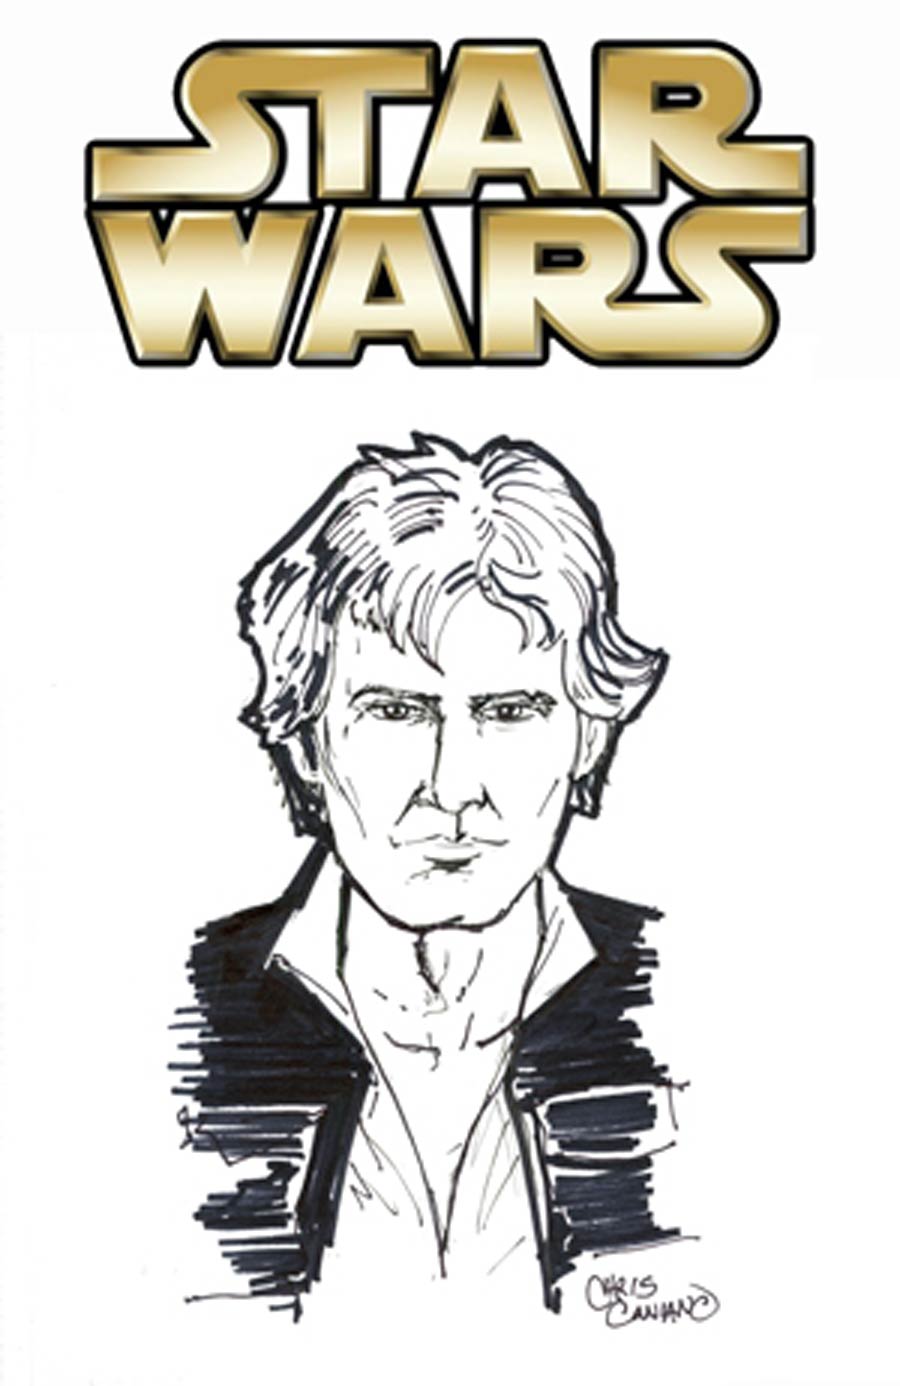 Star Wars Vol 4 #1 Cover Z-G DF Chris Caniano Remarked Han Solo Hand-Drawn Sketch Variant Cover